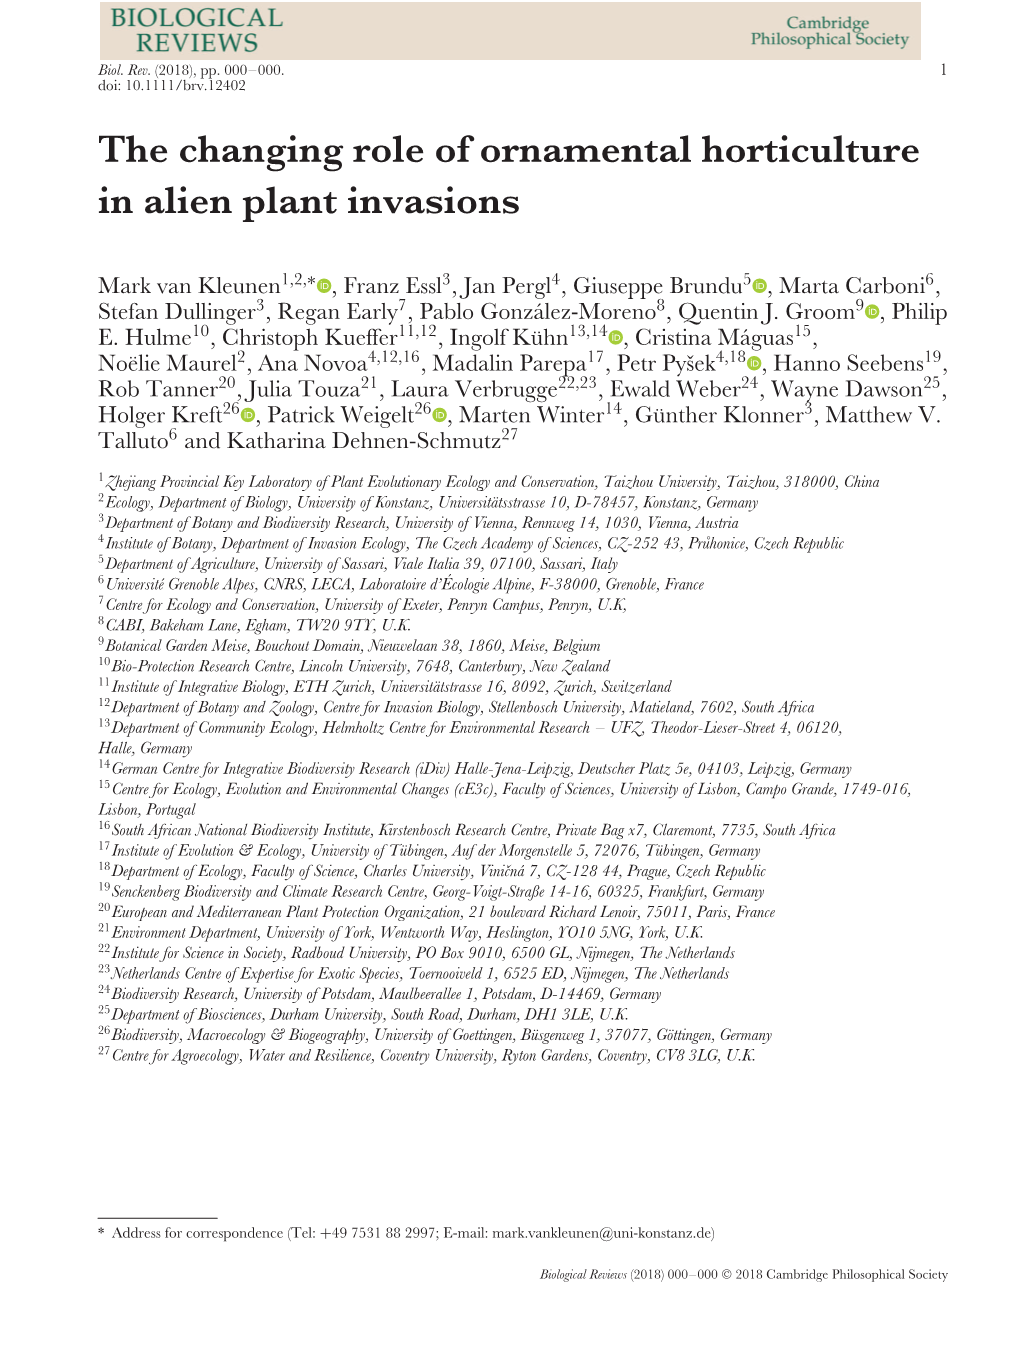 Horticulture and Plant Invasions 3